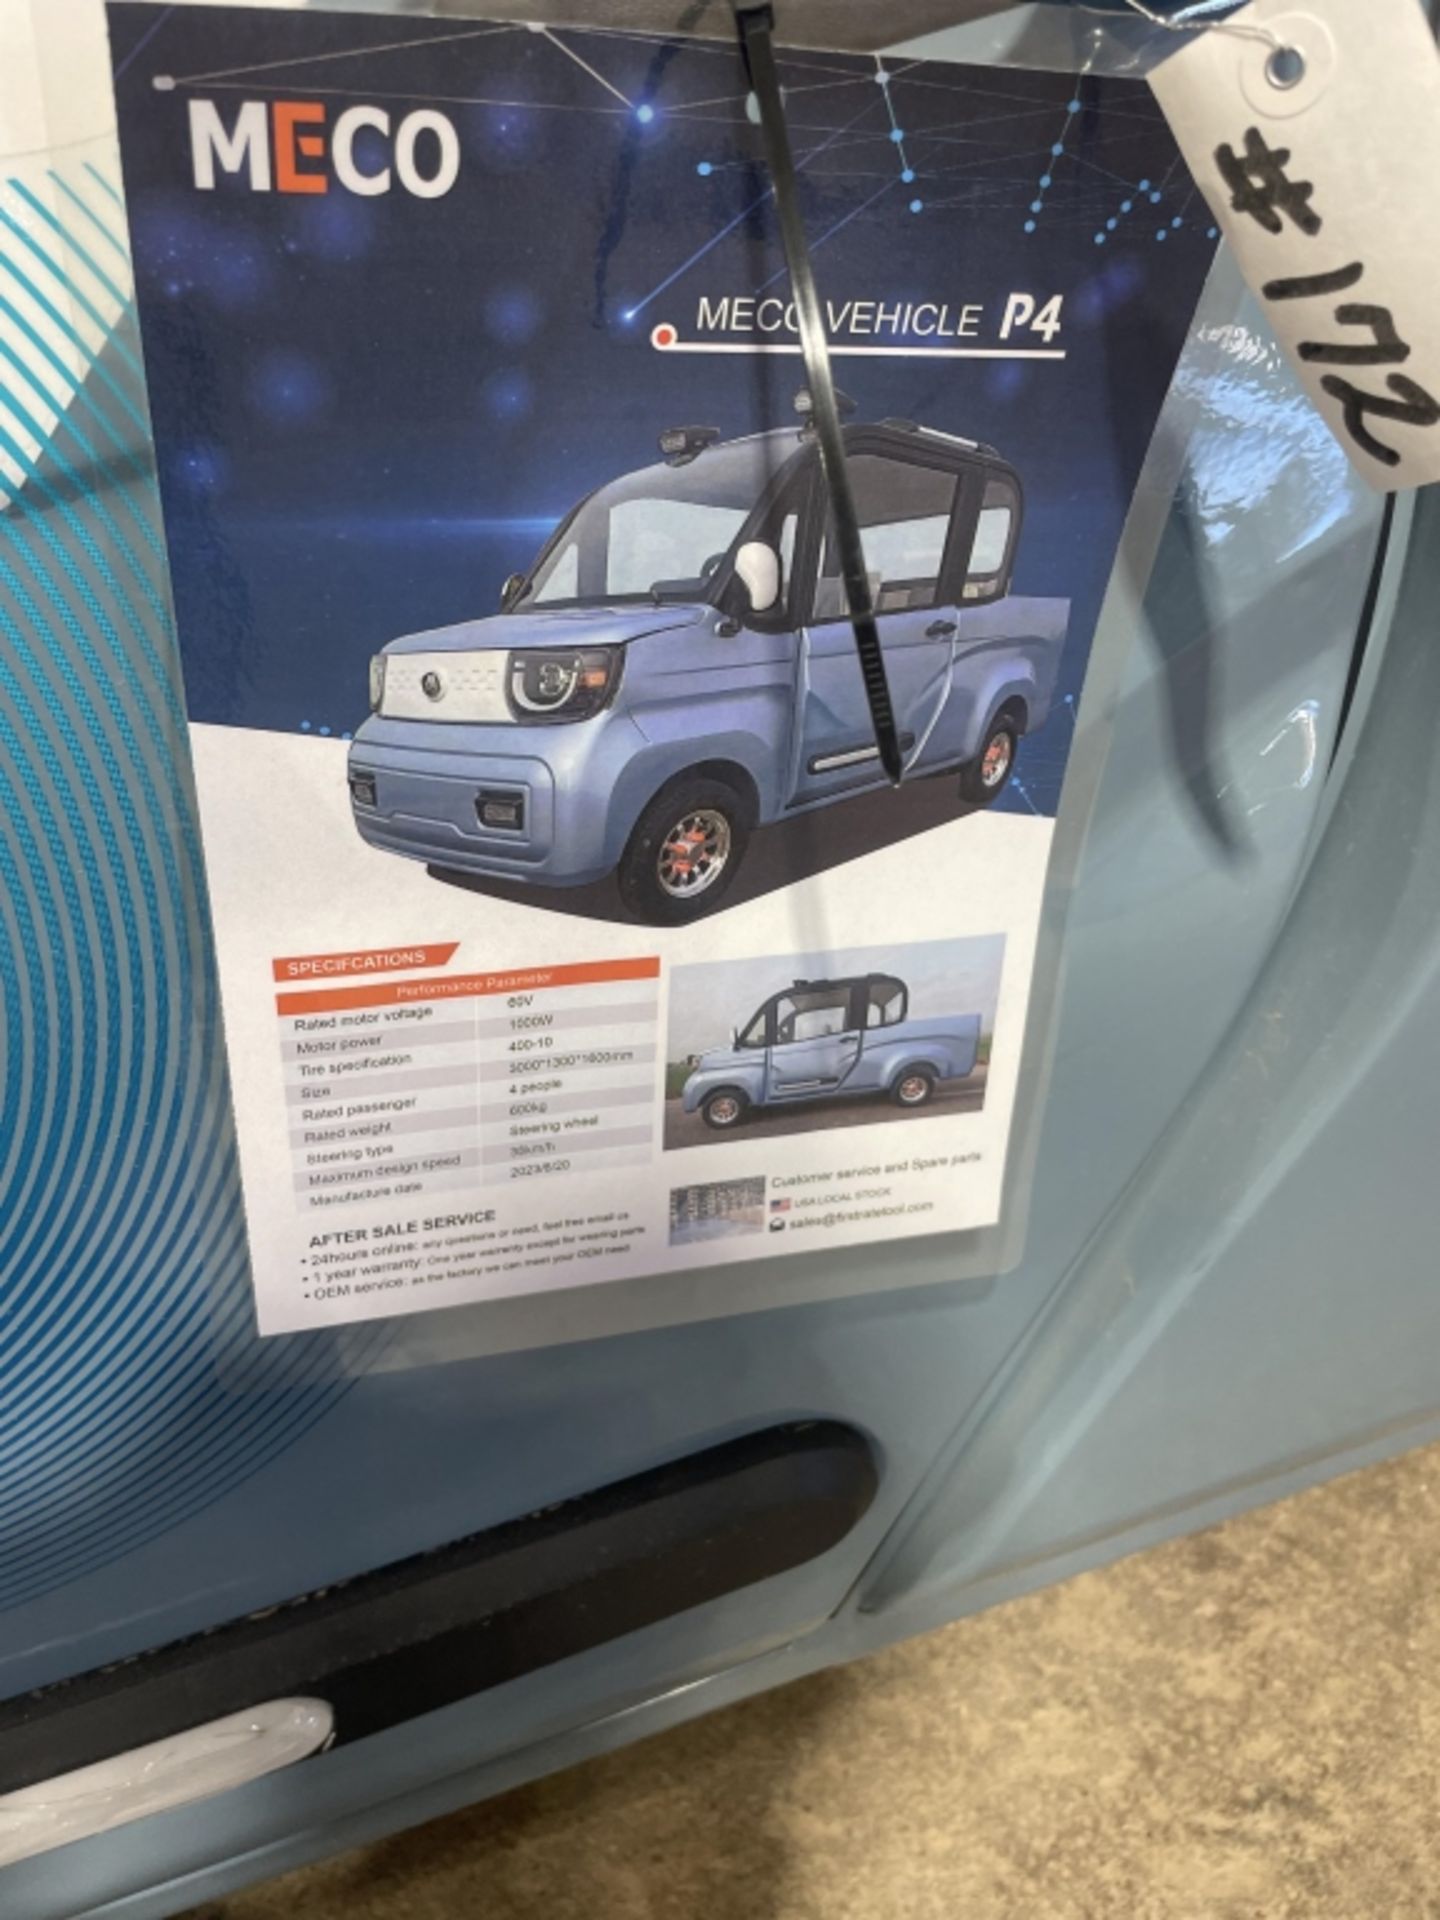 MECO P4 Electric Vehicle - Image 16 of 25